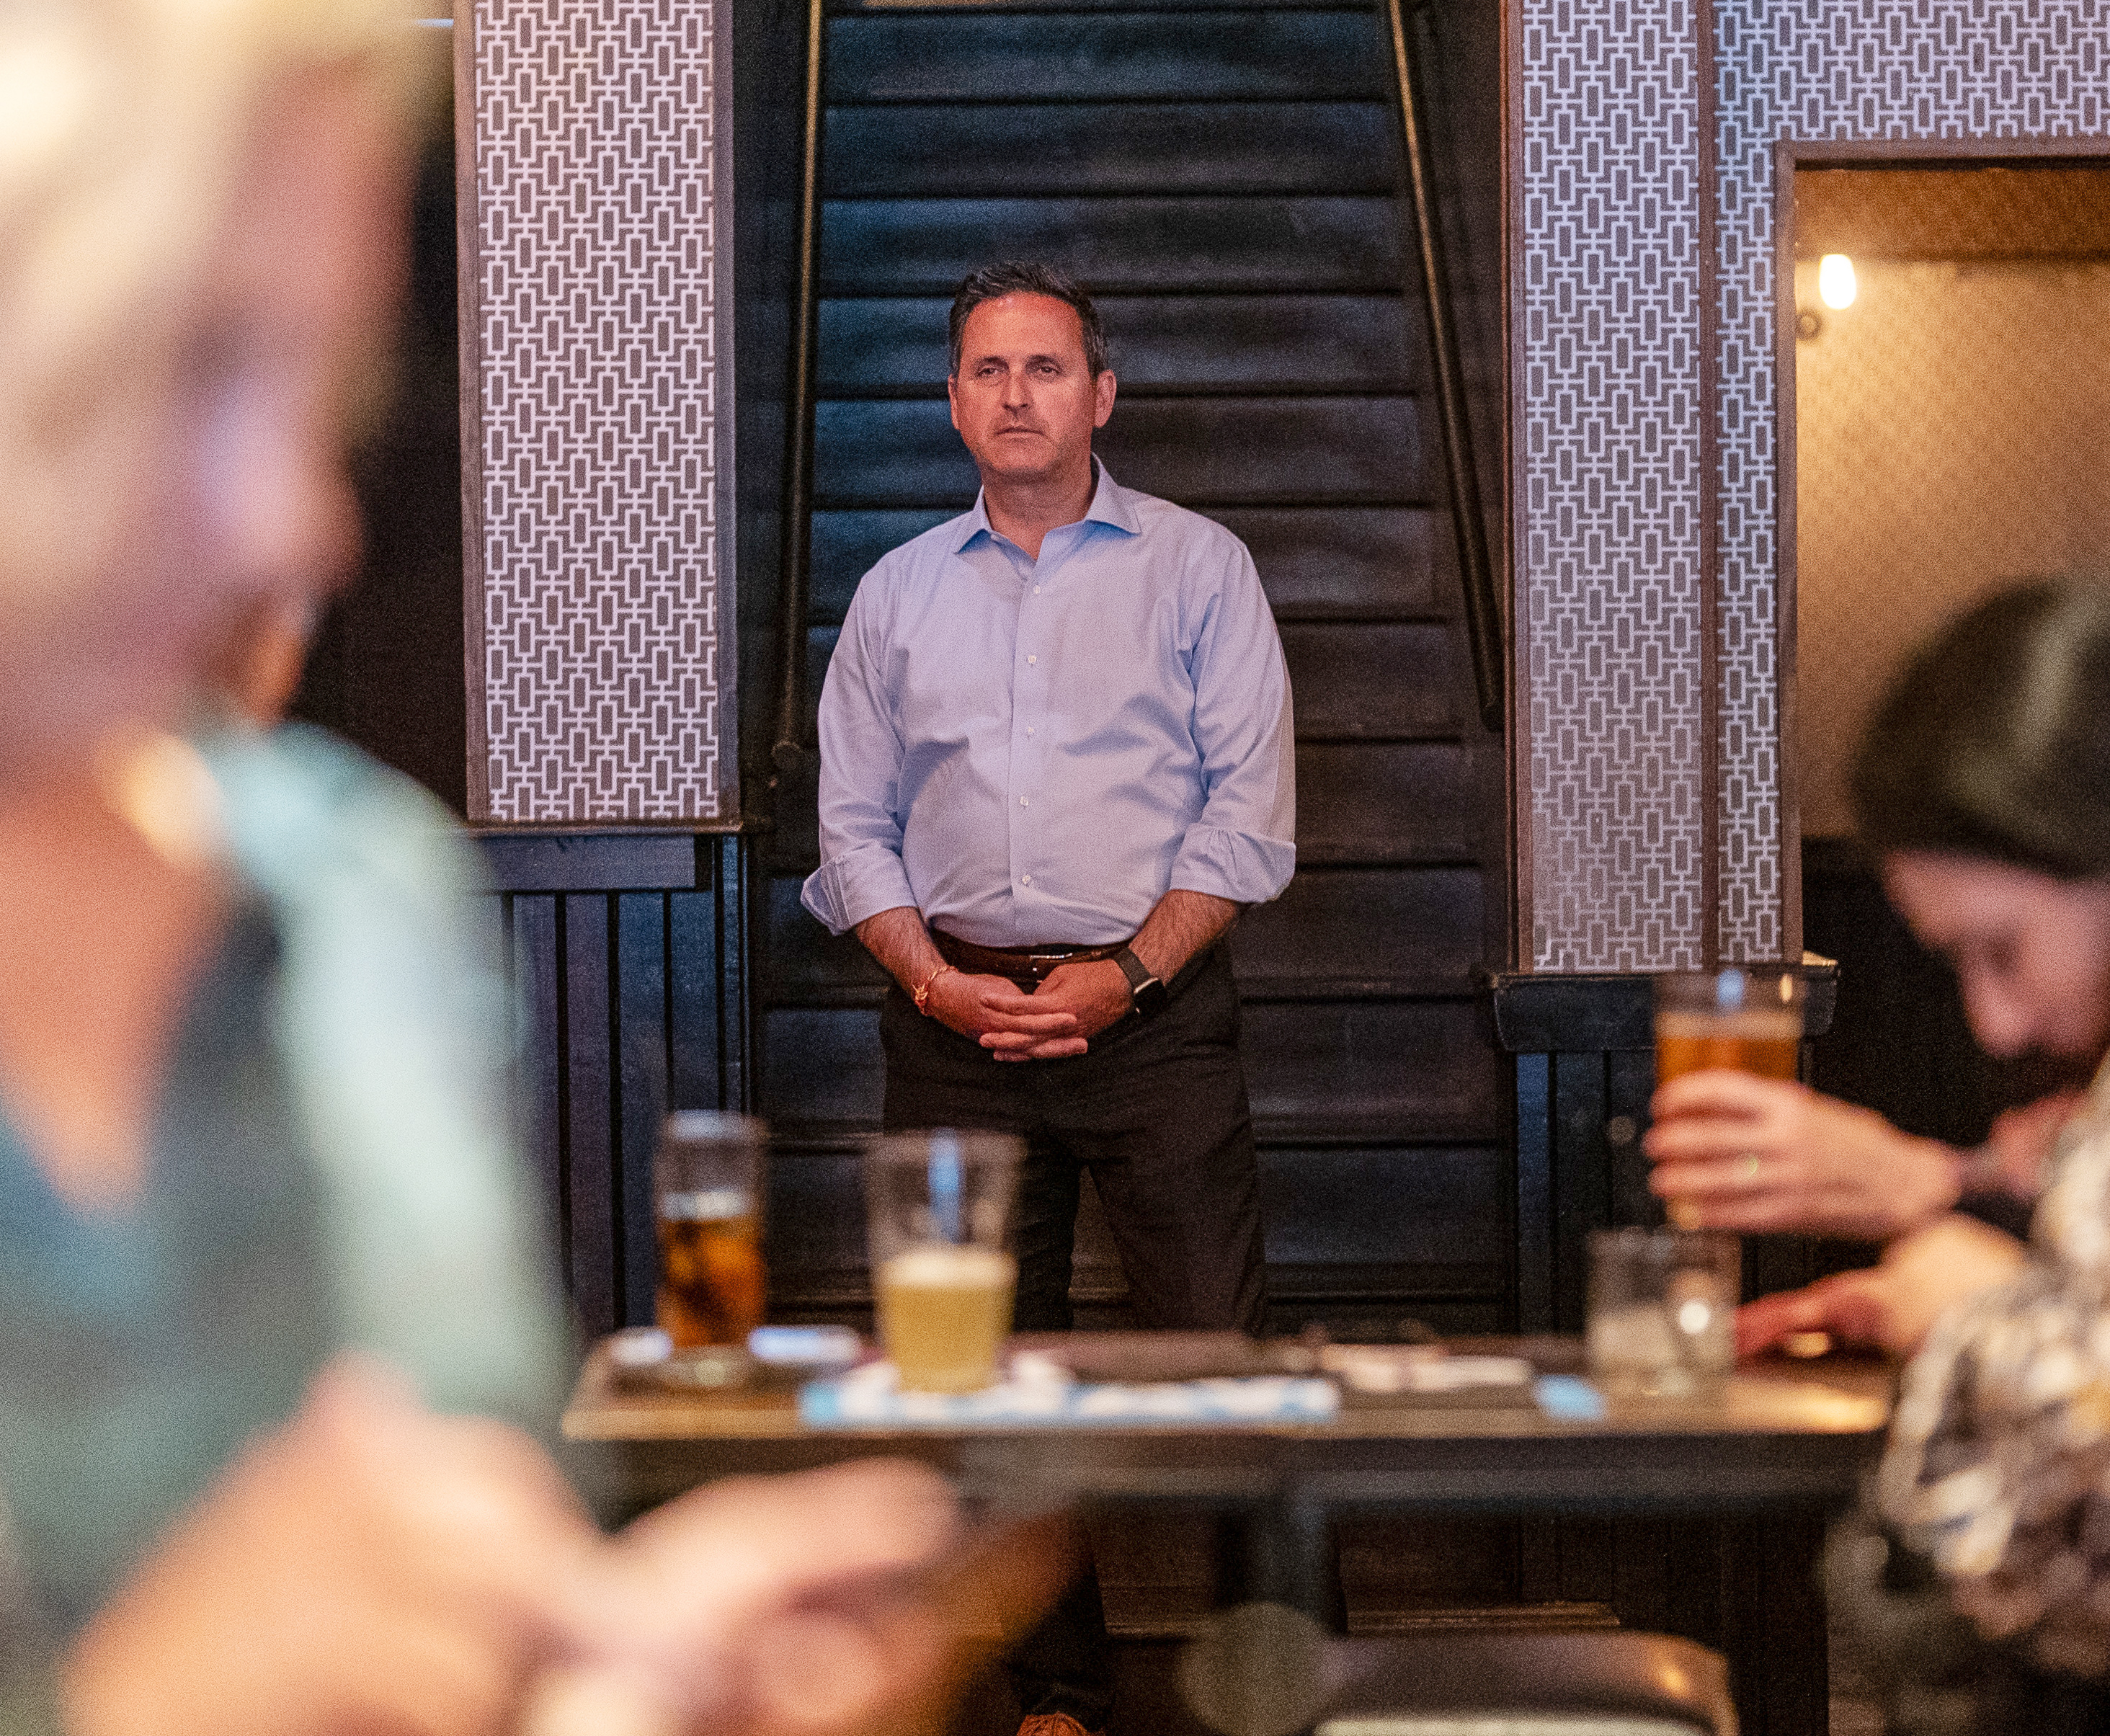 A man in a blue shirt stands attentively in a dimly lit bar, surrounded by blurred figures focused on their drinks and conversations.